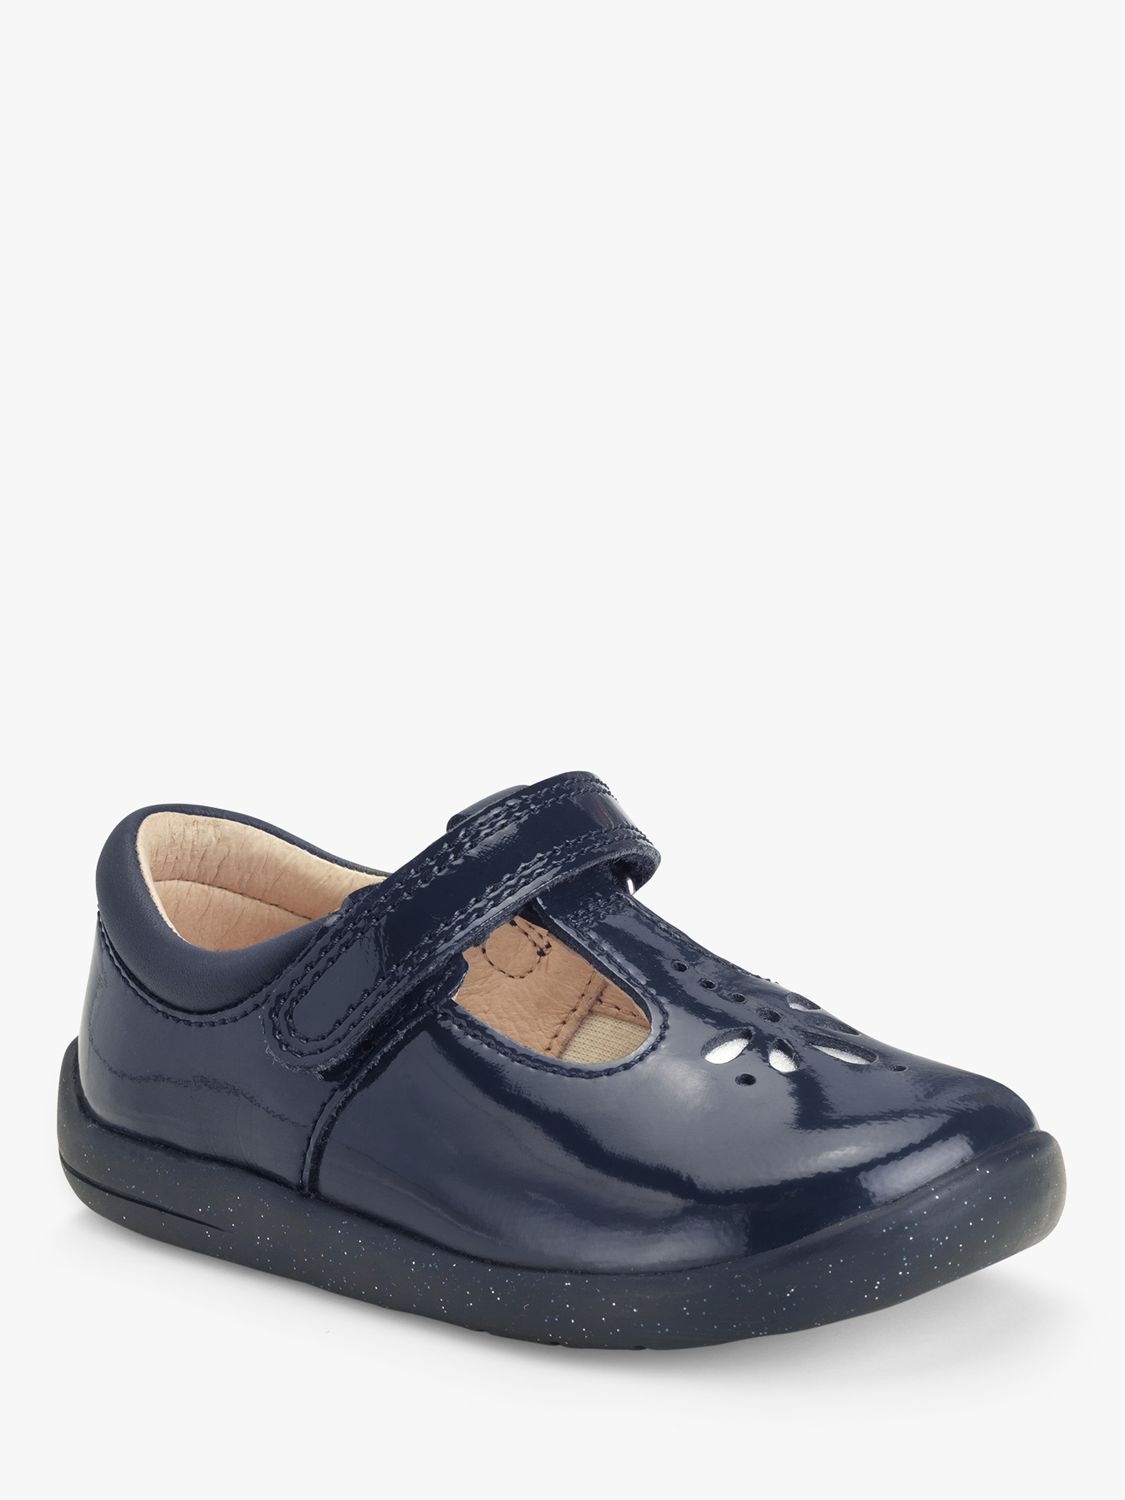 Start-Rite Kids' Puzzle Leather Patent T-Bar Shoes, Navy, 8G Jnr